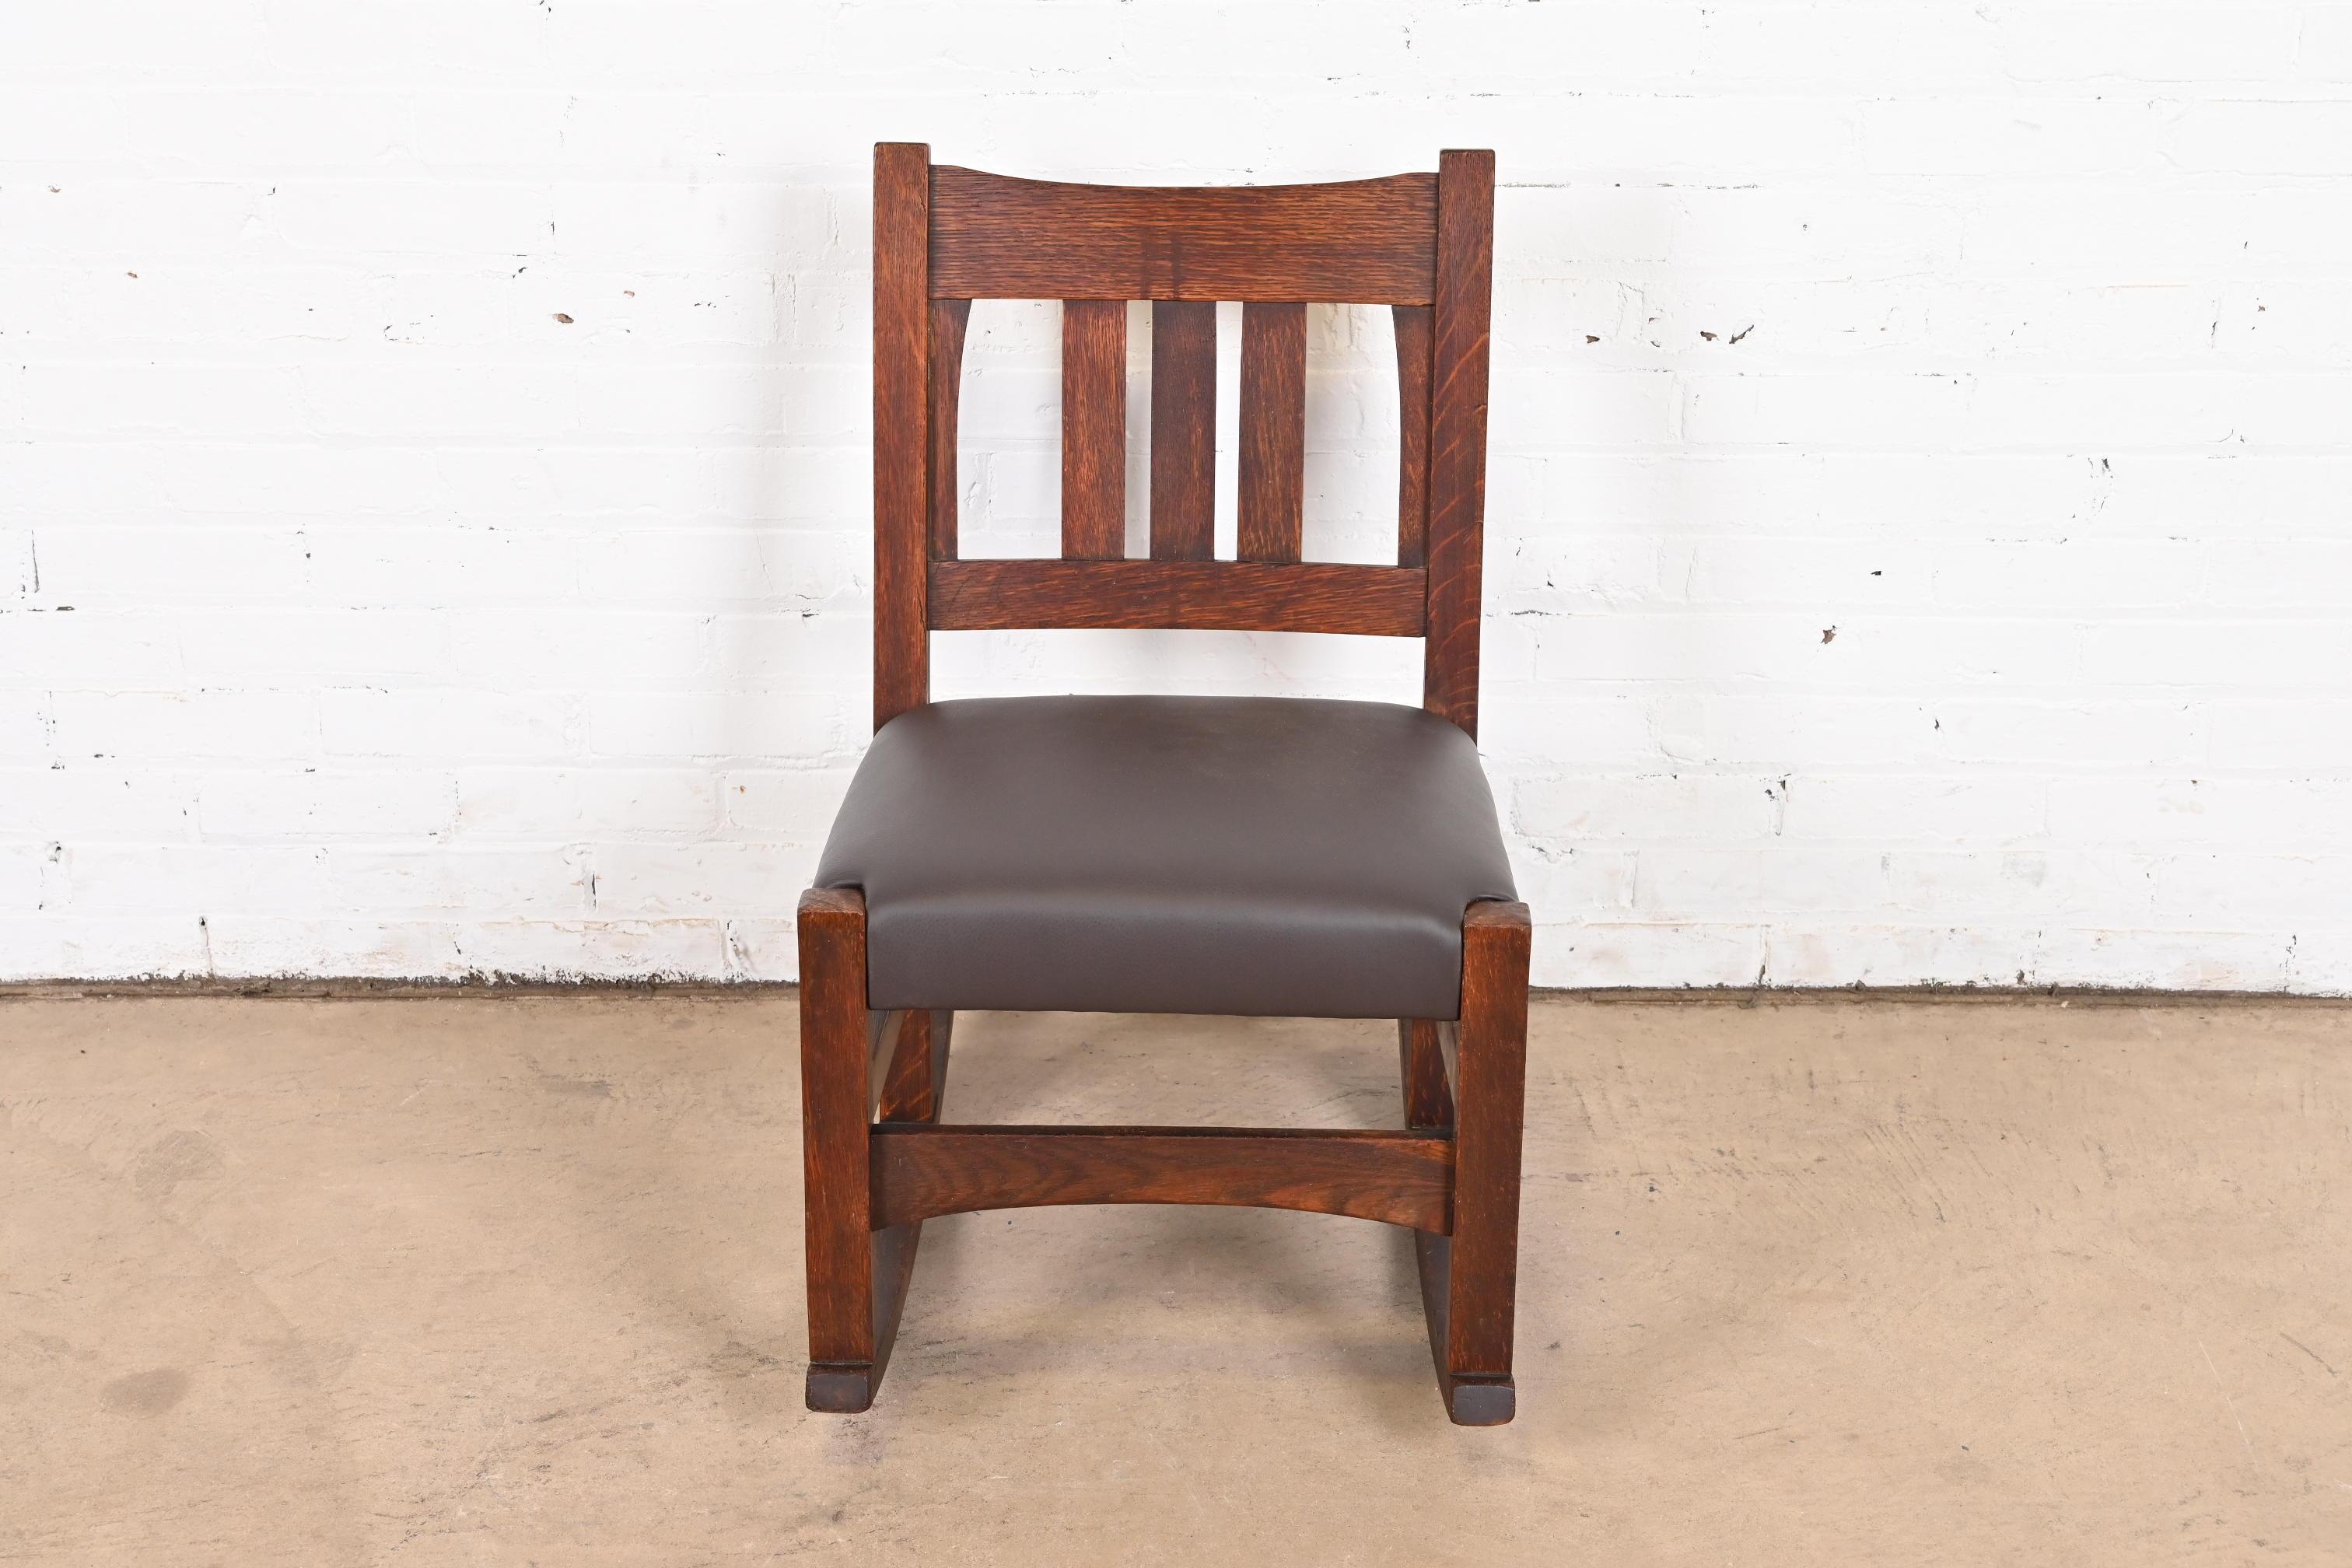 Gustav Stickley Antique Mission Oak Arts & Crafts Sewing Rocking Chair In Good Condition For Sale In South Bend, IN